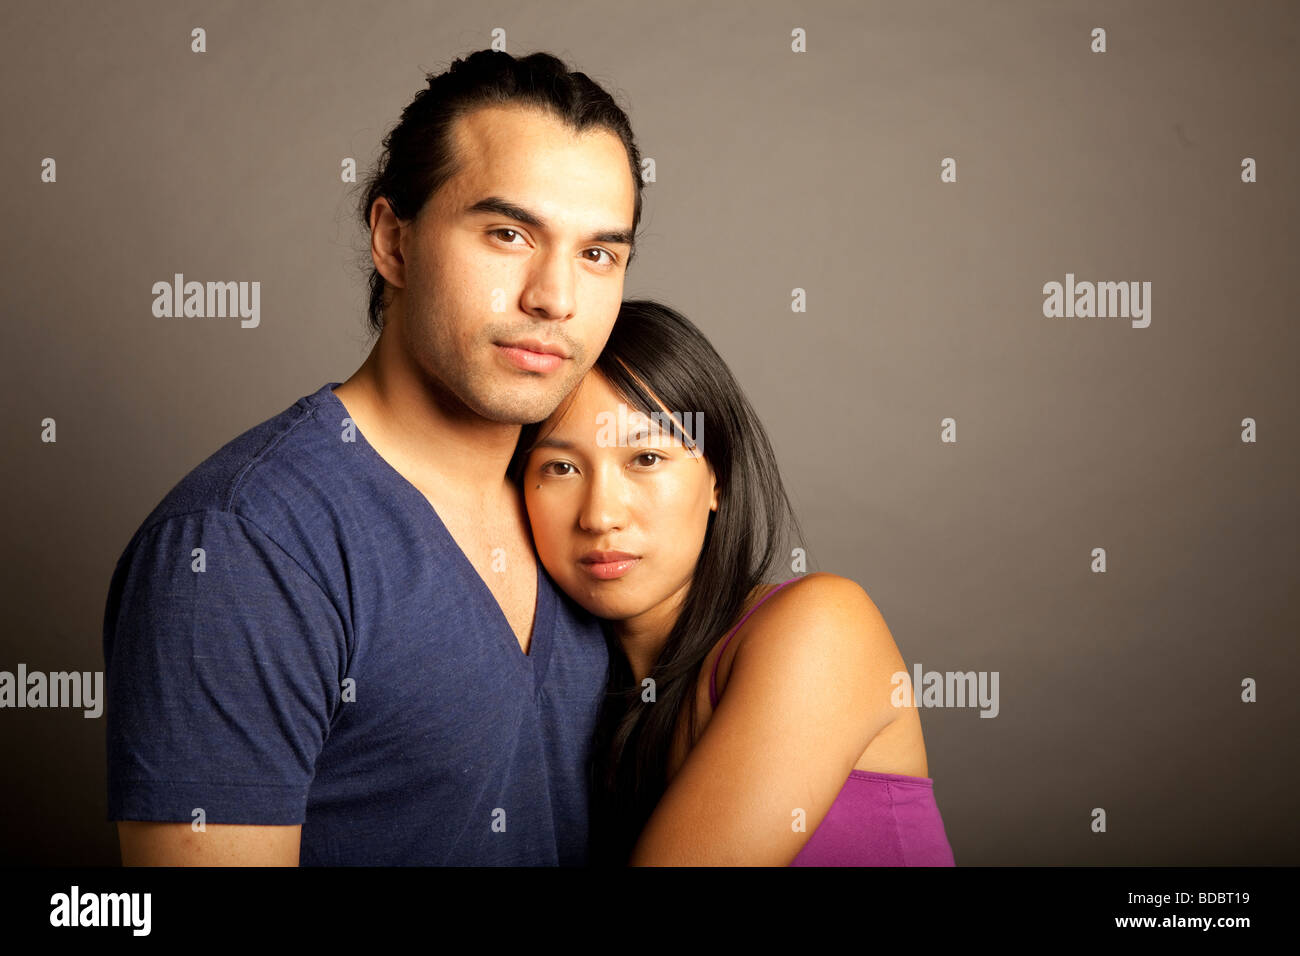 Portrait of Filipino female and ethnic male couple holding each other against gray background.  Looking at camera. Stock Photo